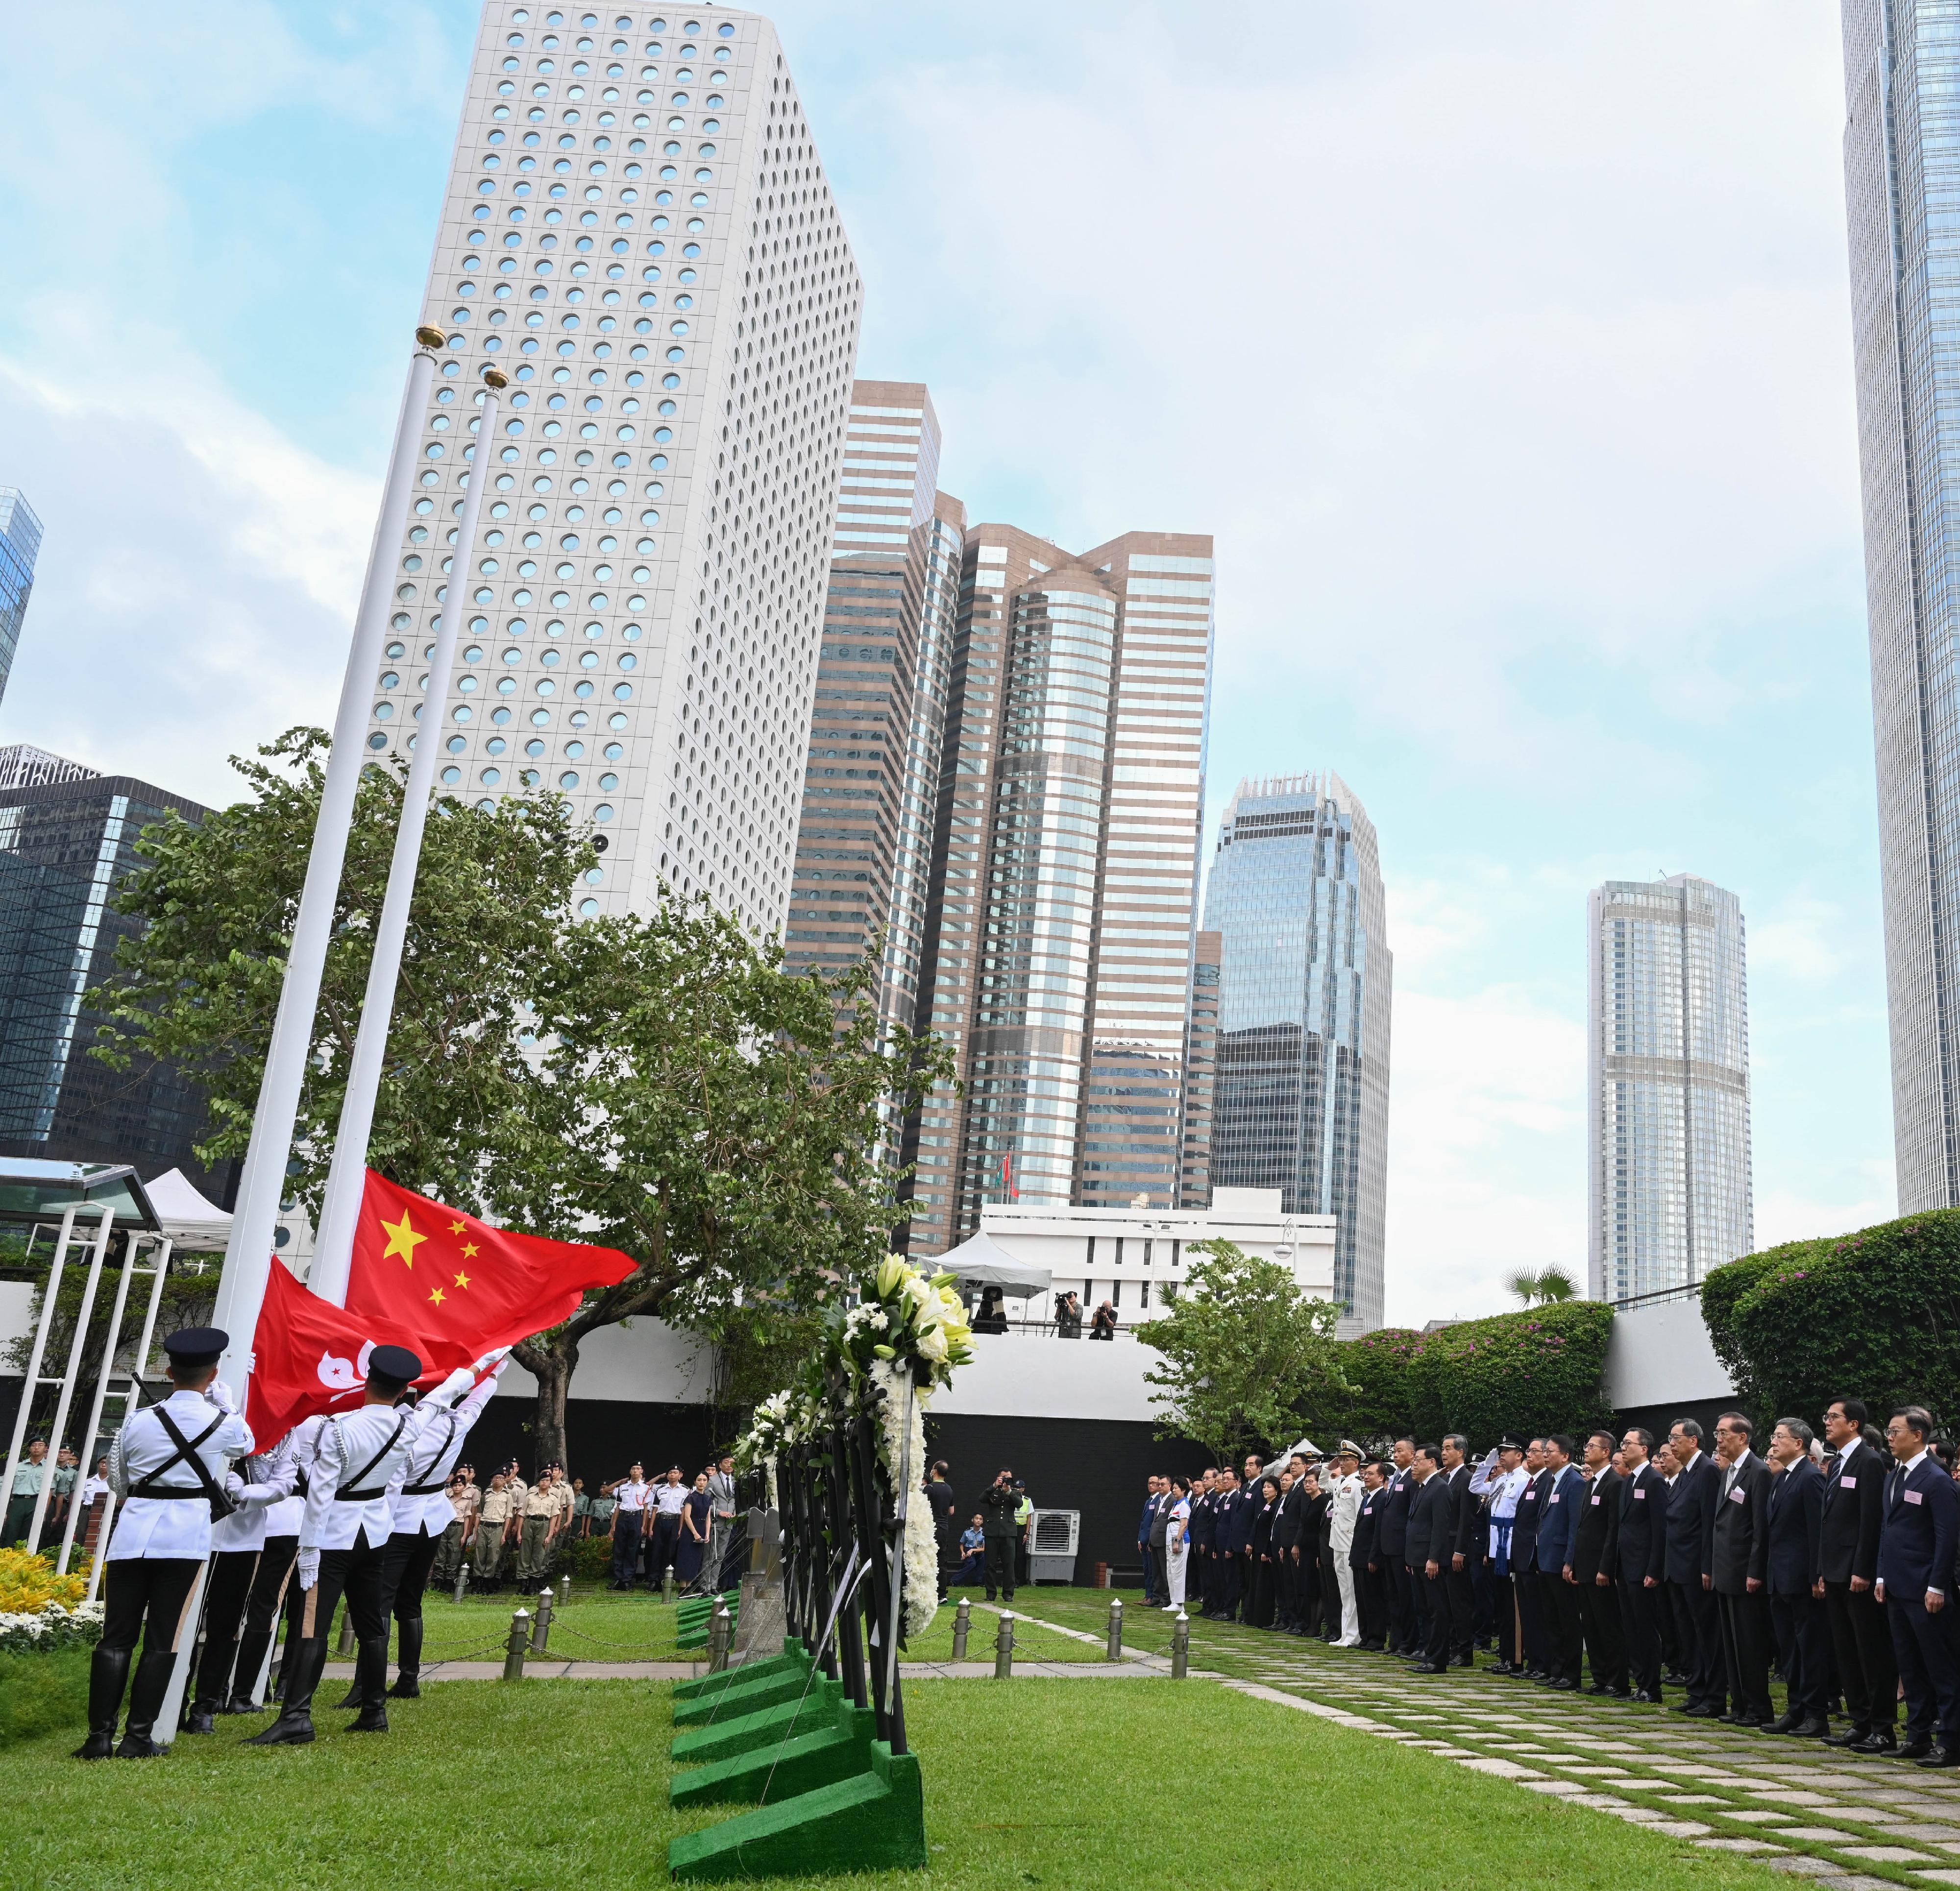 The Government of the Hong Kong Special Administrative Region held an official ceremony today (September 3) at the Hong Kong City Hall Memorial Garden to commemorate the Victory Day of the Chinese People's War of Resistance Against Japanese Aggression.